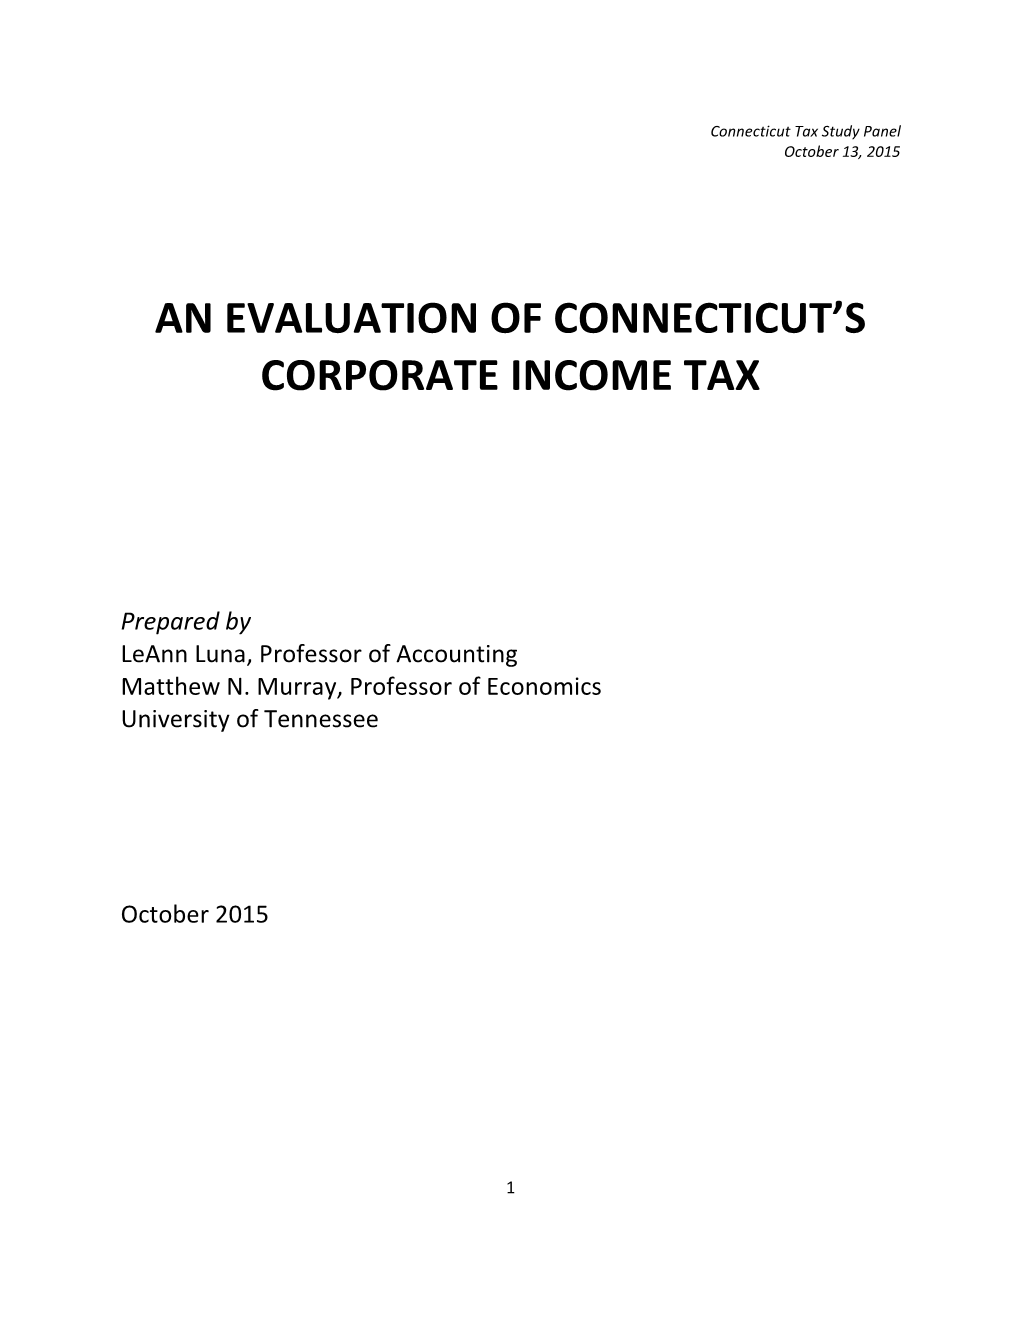 An Evaluation of Connecticut's Corporate Income